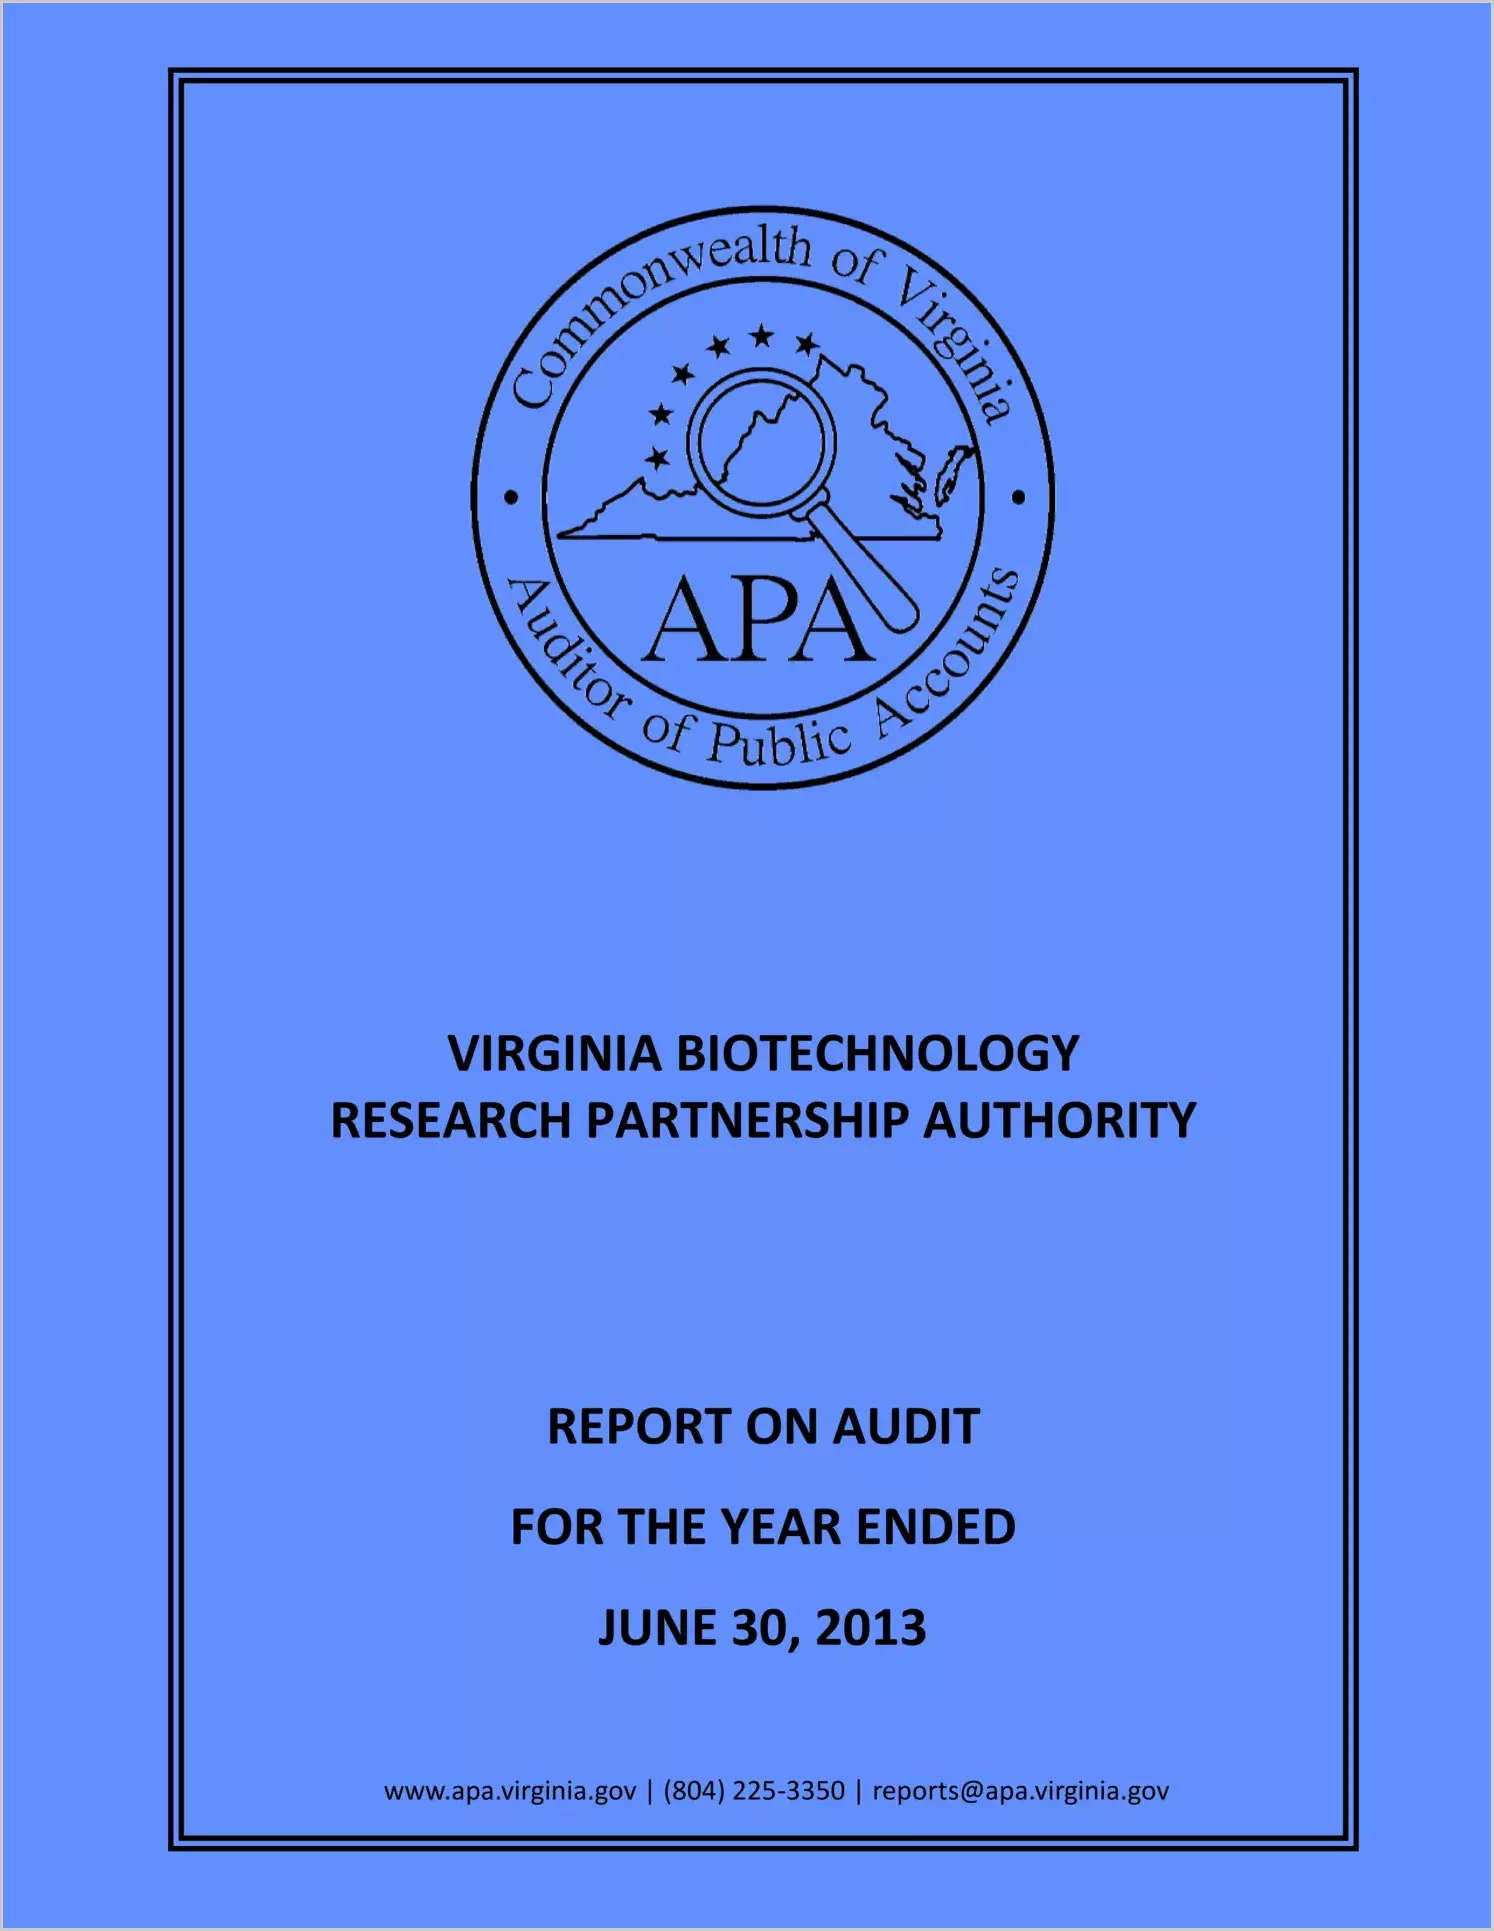 Virginia Biotechnology Research Partnership Authority for the year ended June 30, 2013